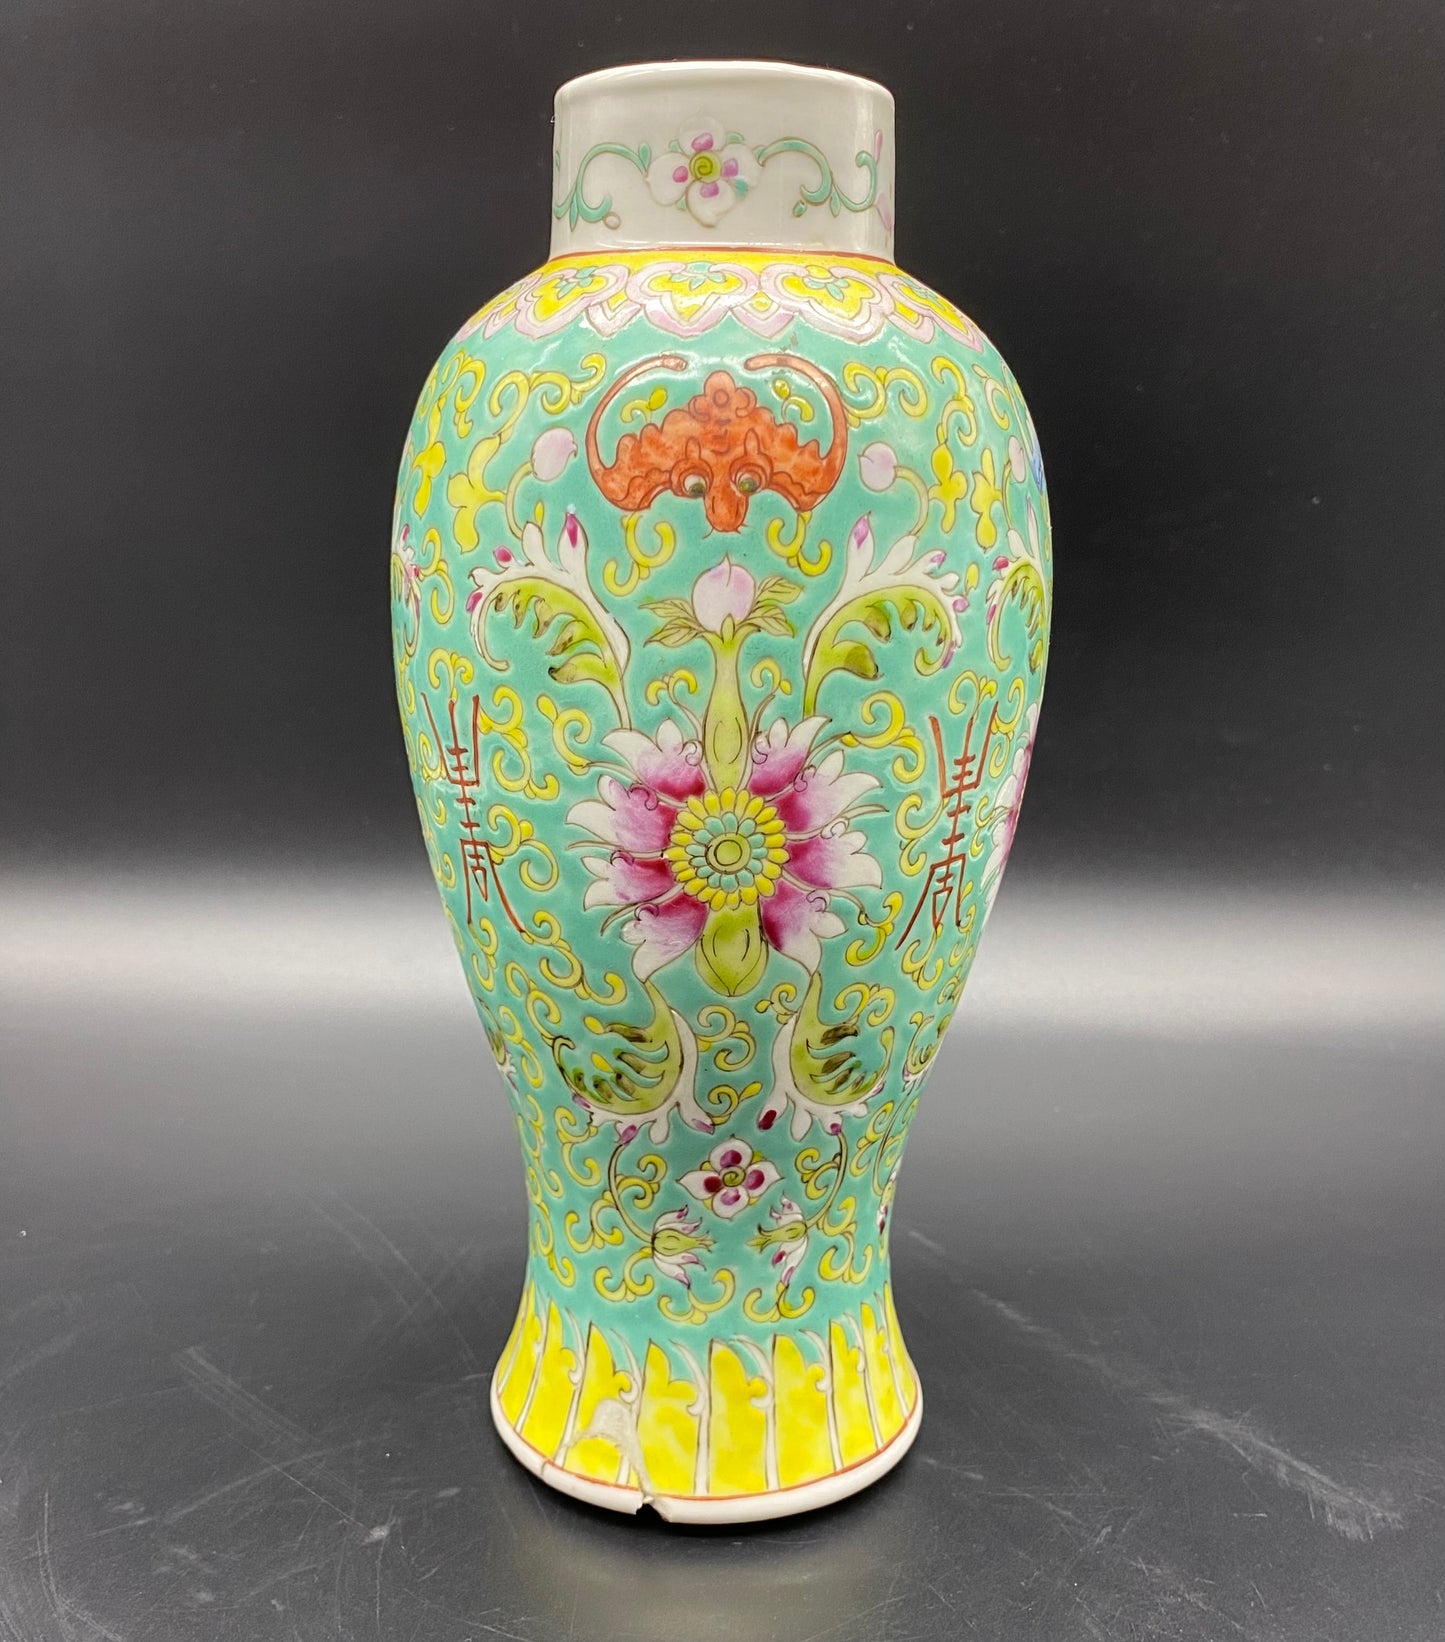 Chinese Vase extremely well enamelled with brightly coloured bats, Flowers and other Chinese symbols